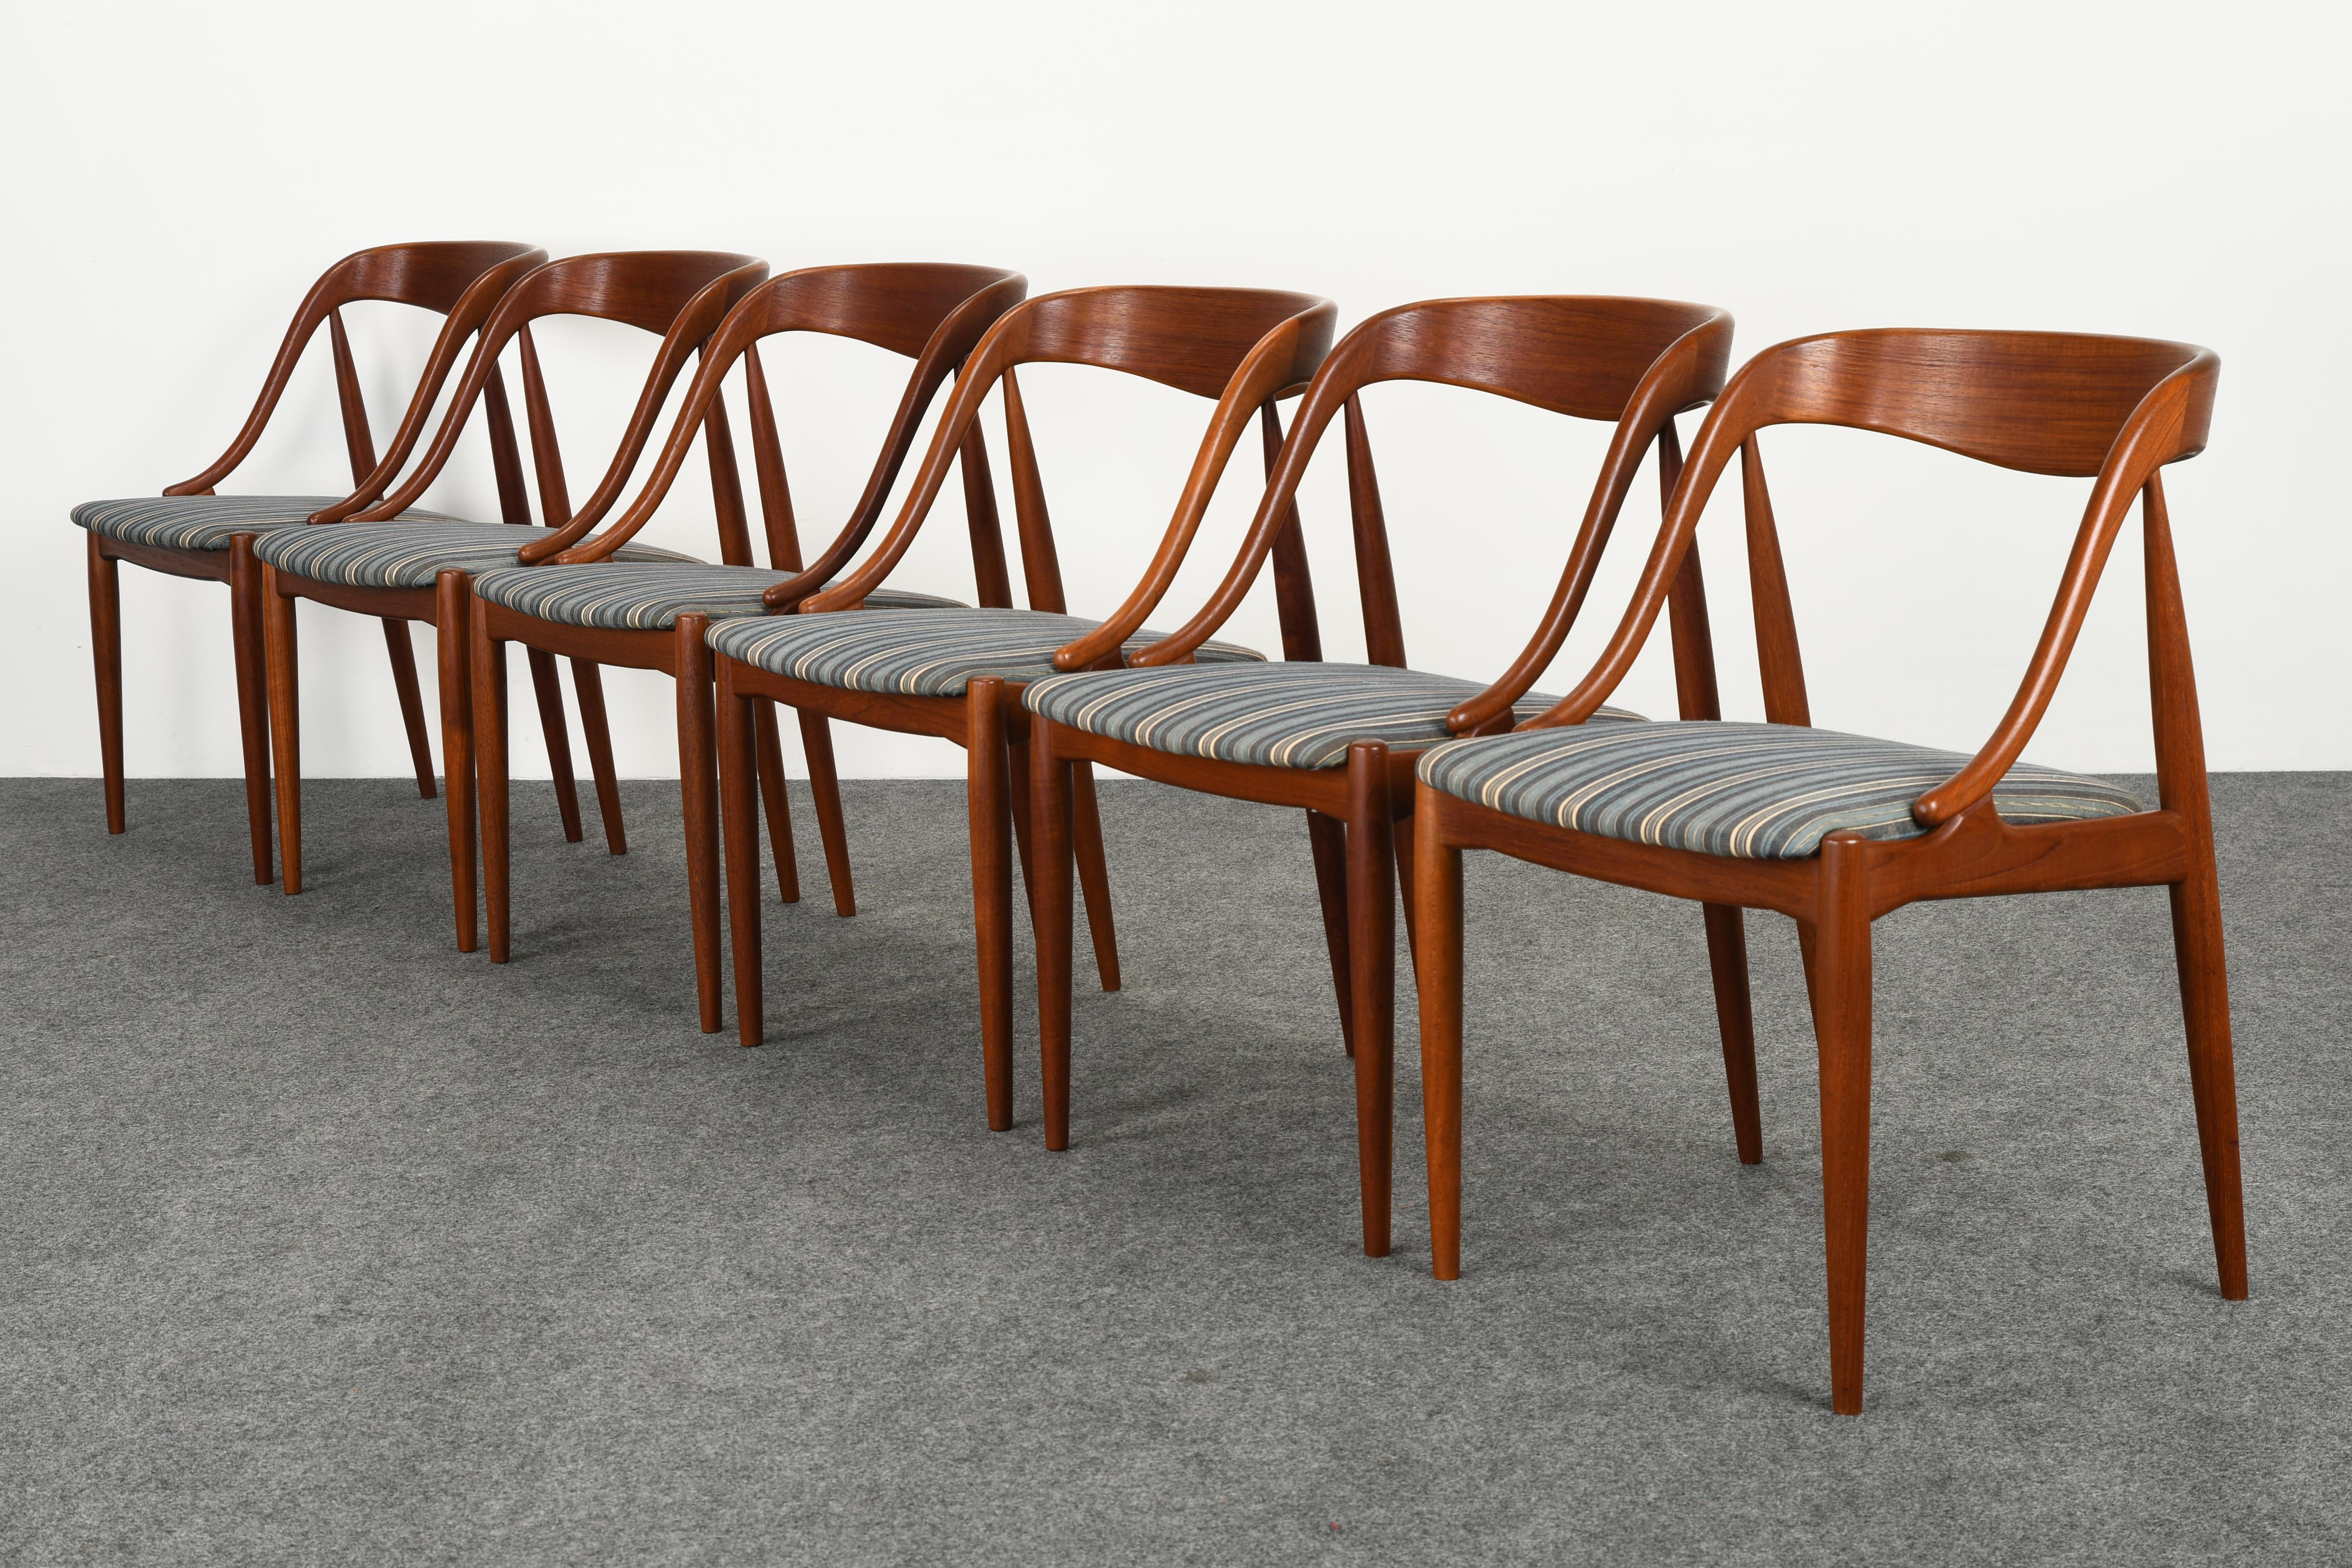 A sculptural Mid-Century Modern set of six Danish dining chairs designed by Johannes Andersen for Moreddi. These beautiful chairs have wonderful lines and would look great in any modern or contemporary interior. They have the original fabric on the